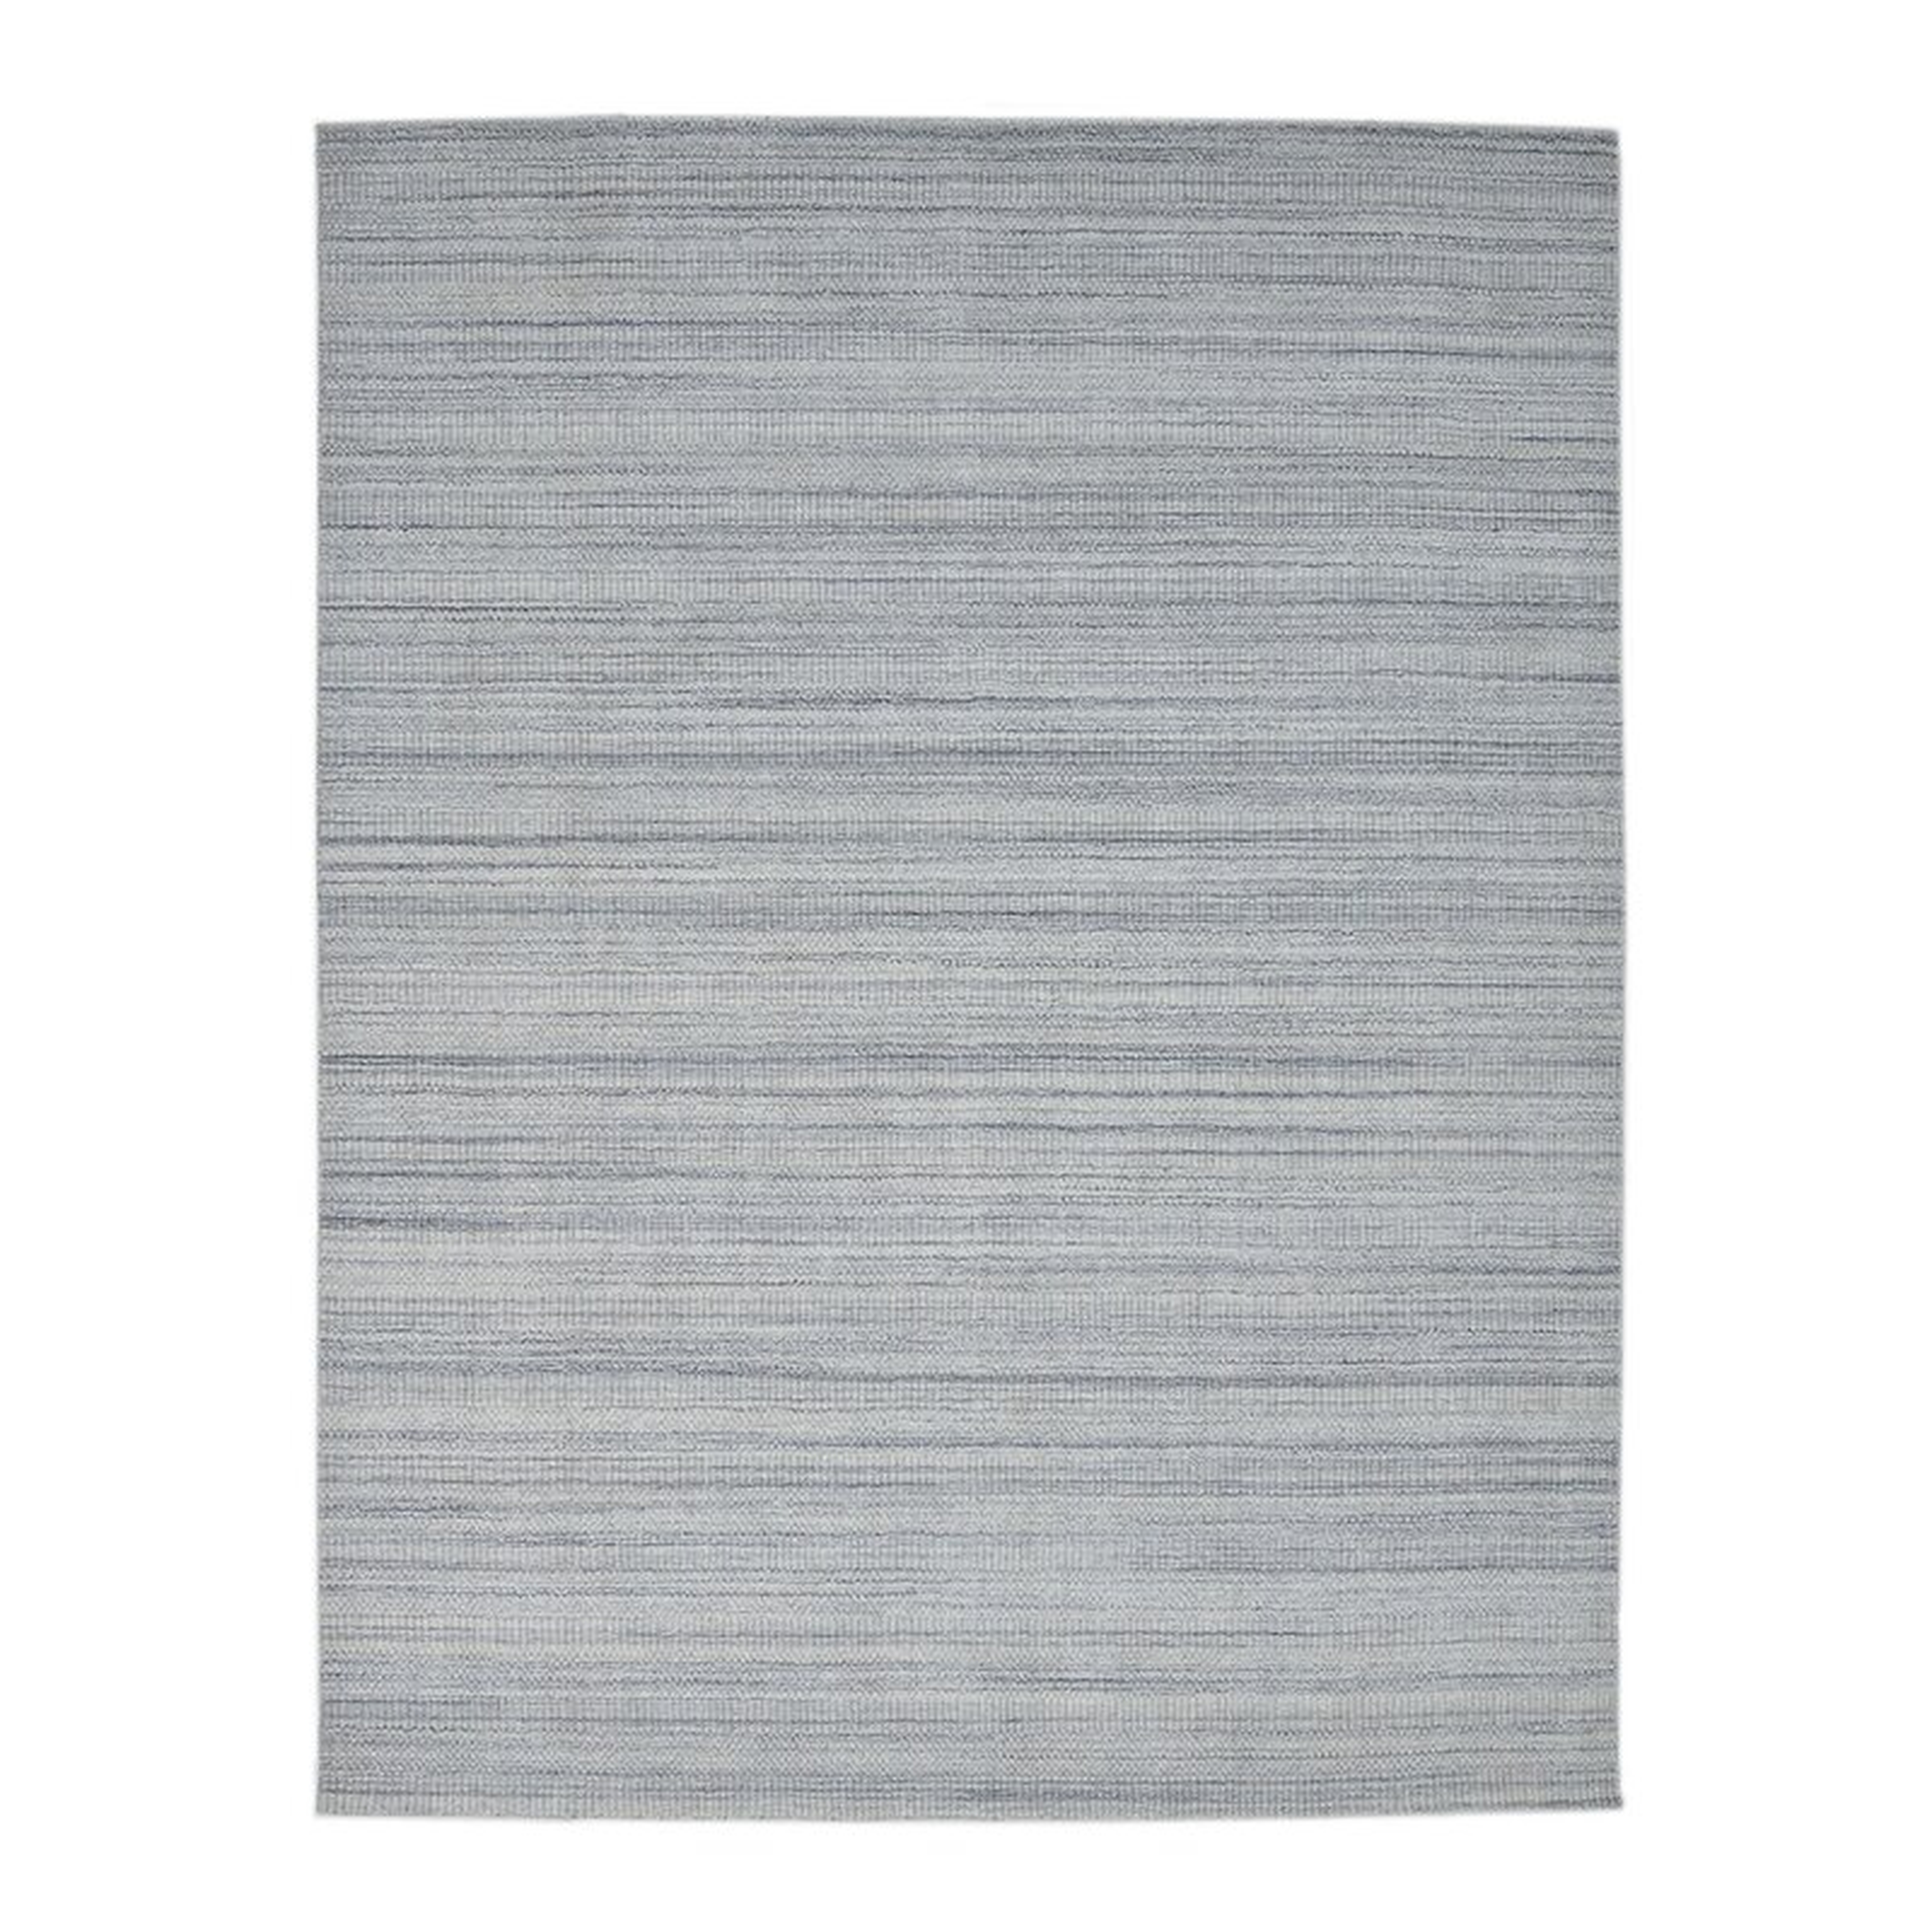 Solo Rugs Abstract Wool Light Blue Area Rug Rug Size: Rectangle 8' W x 10' L - Perigold